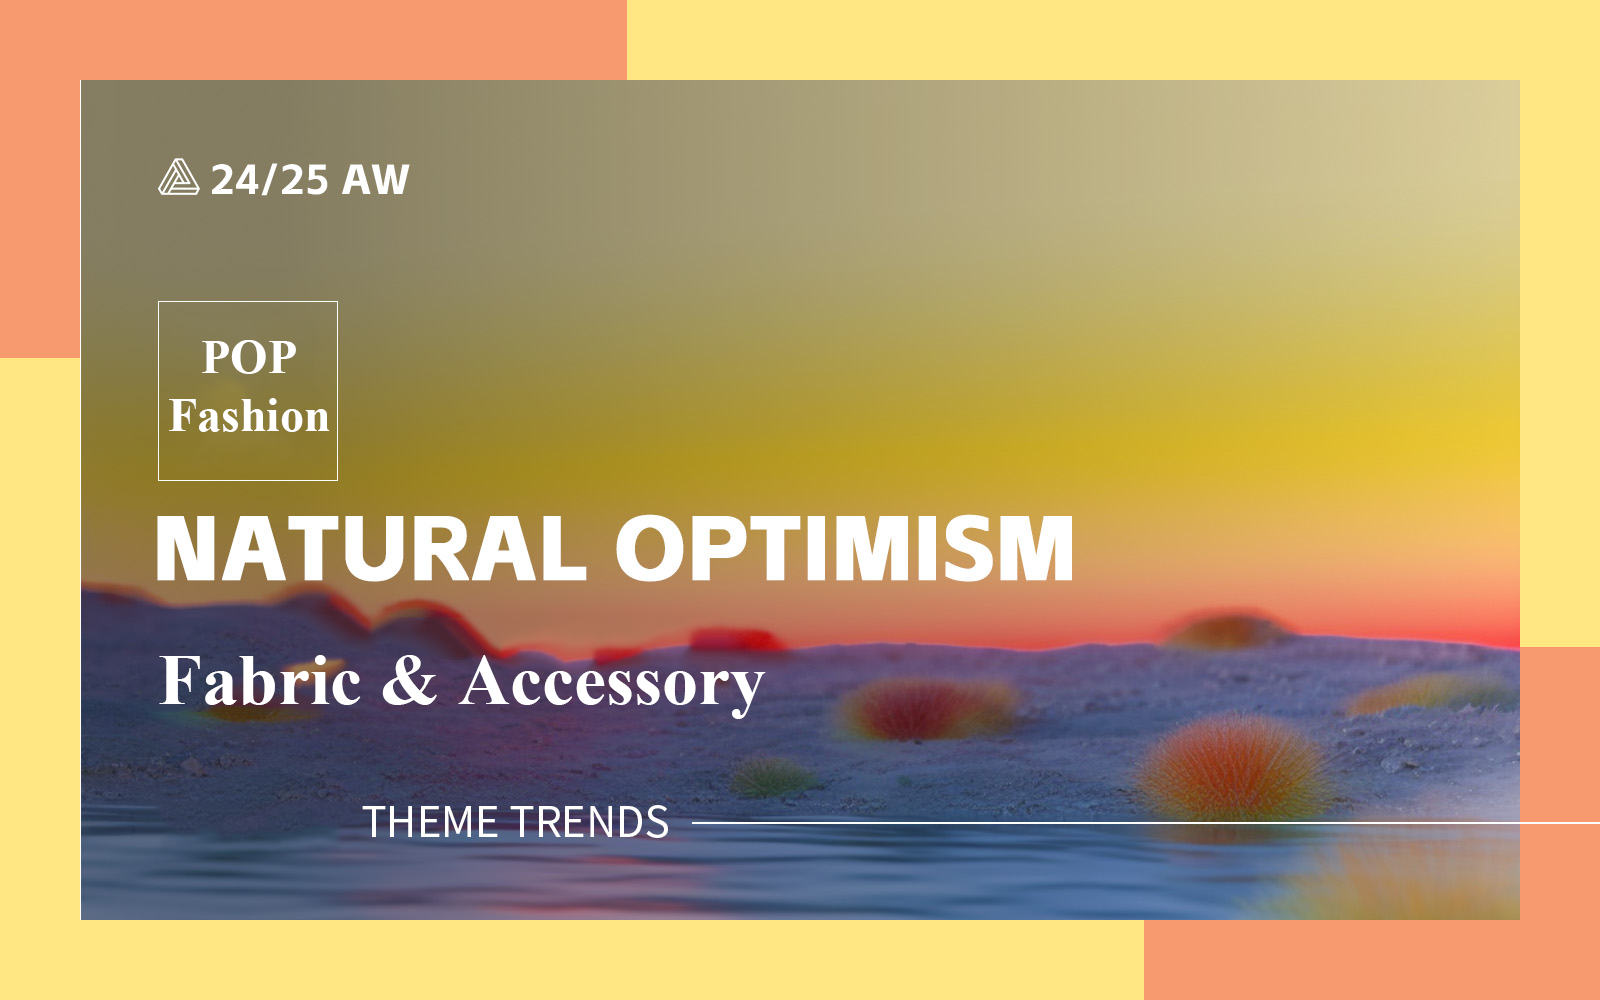 Natural Optimism -- A/W 24/25 Fabric & Accessory Trend